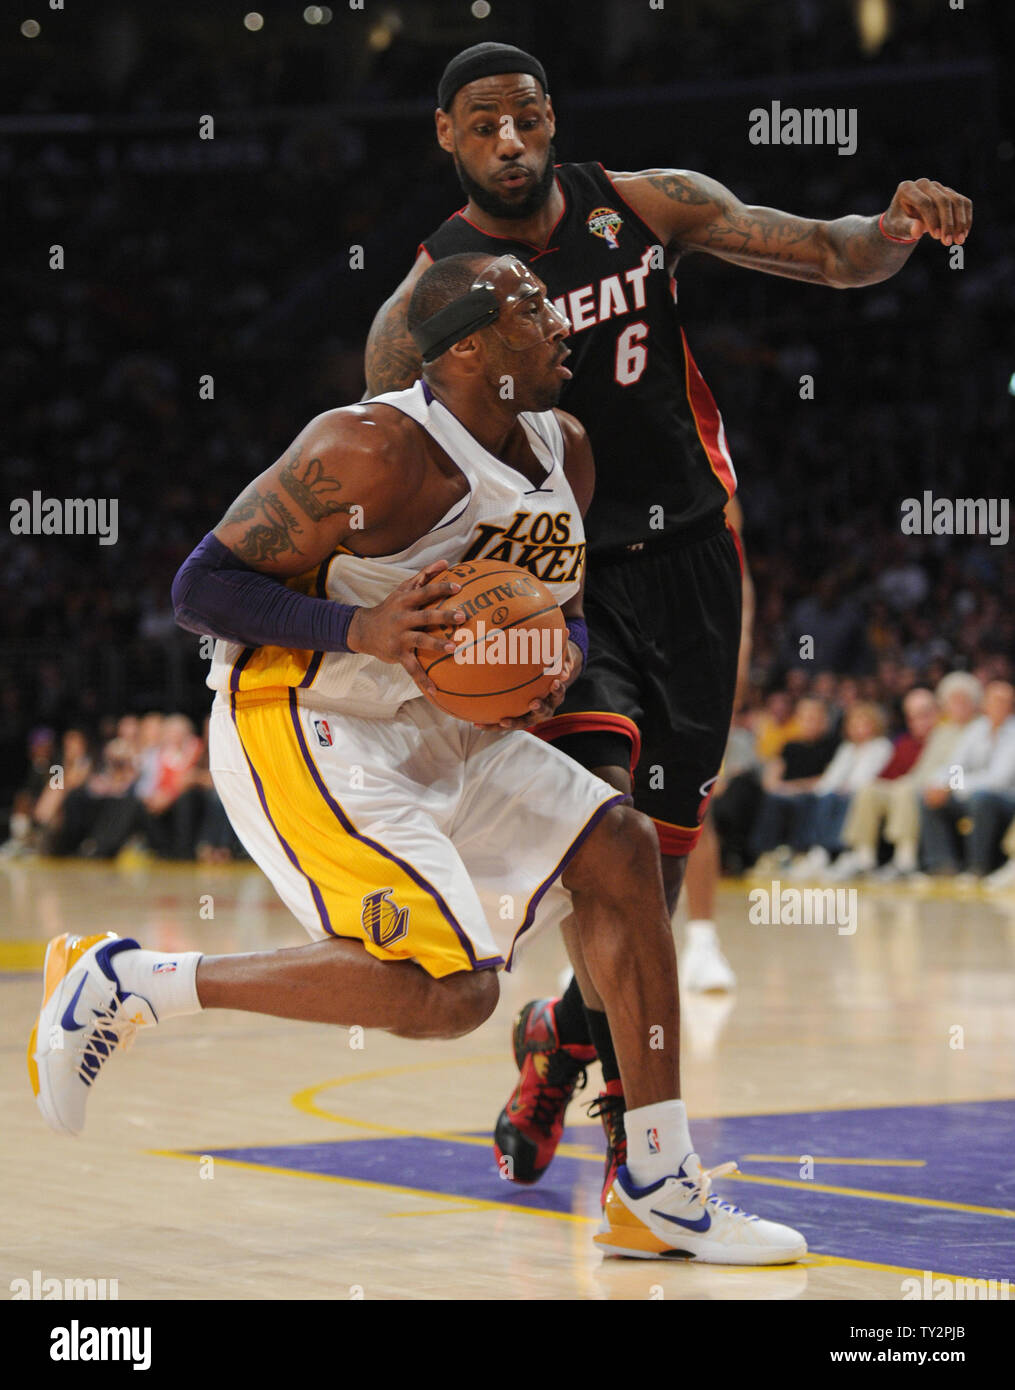 Los Angeles Lakers shooting guard Kobe Bryant (24) drives past Miami Heat small forward LeBron James (6) in the first half of  their NBA basketball game in Los Angeles on March 4, 2012.    UPI/Lori Shepler Stock Photo